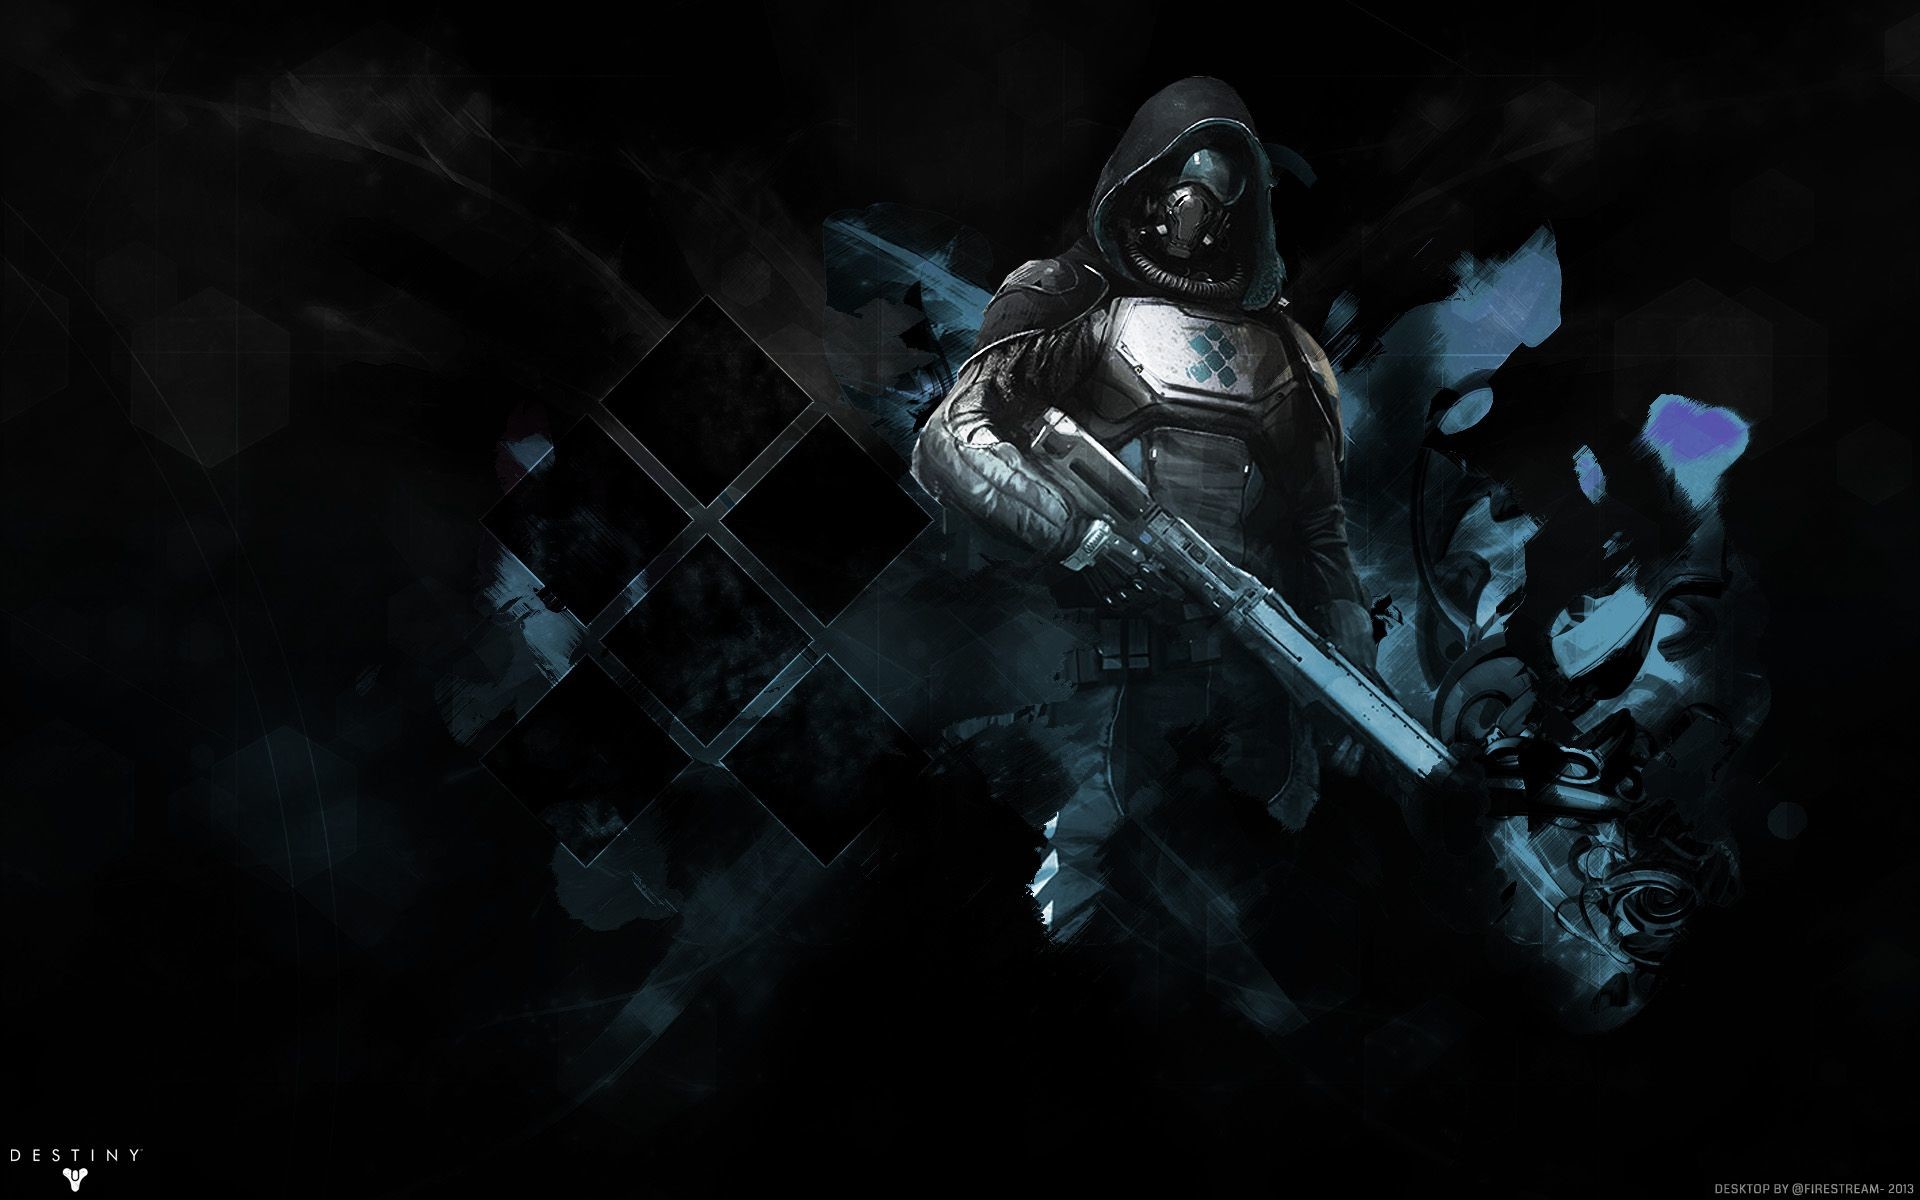 1920x1200 1920x1080 24+ Destiny Backgrounds, Wallpapers, Images, Pictures | Design  ...">